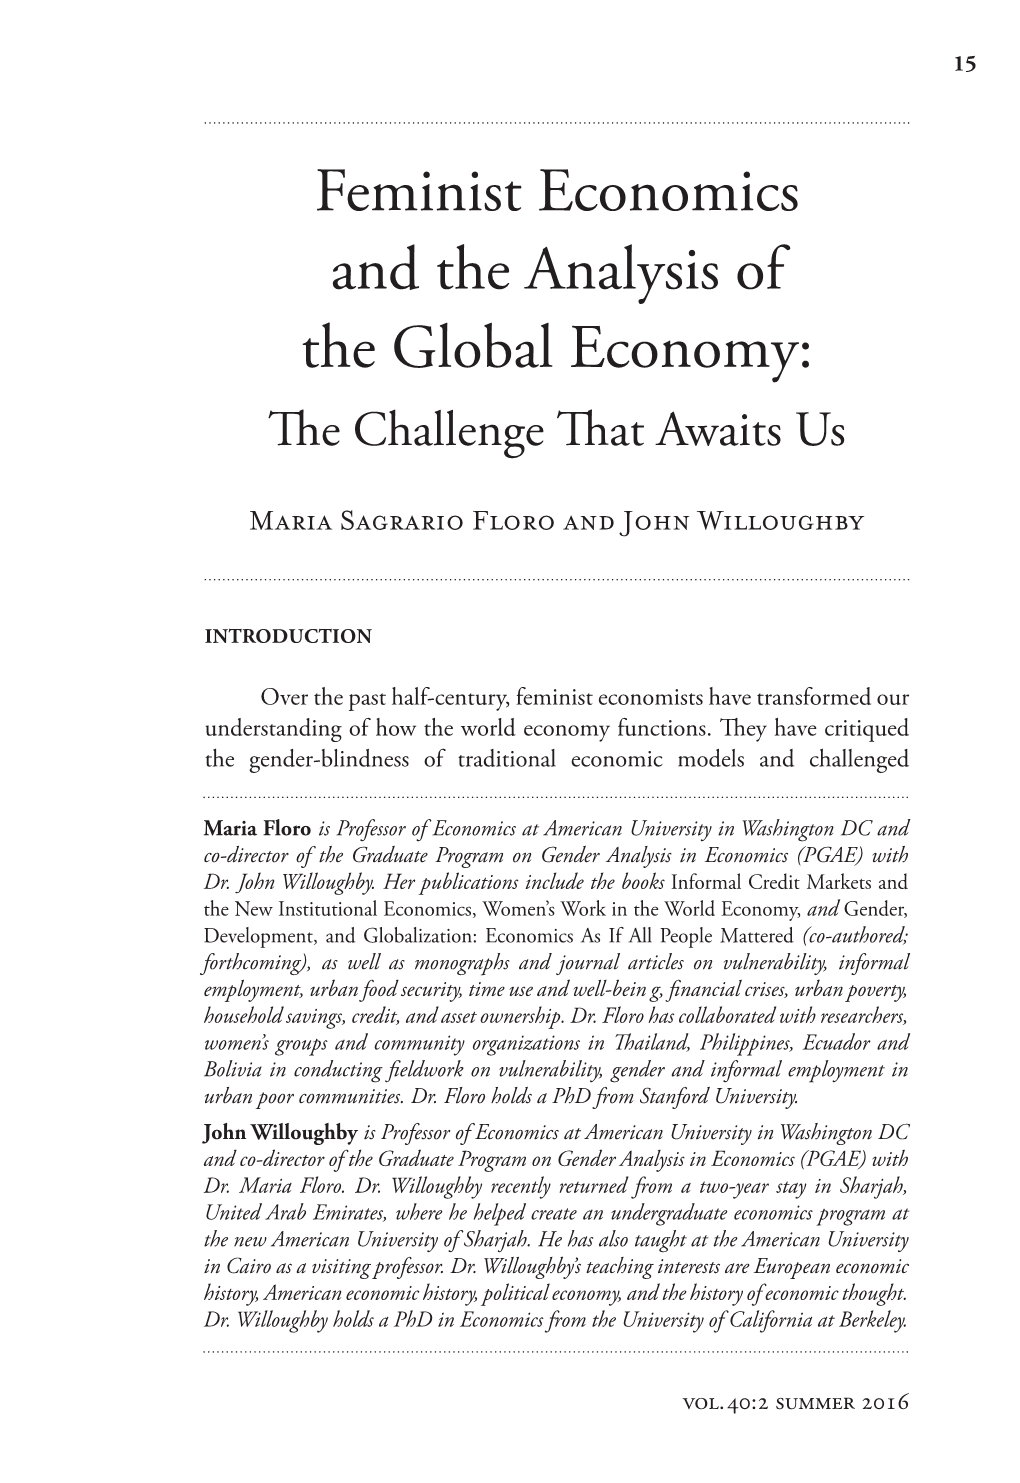 Feminist Economics and the Analysis of the Global Economy: the Challenge That Awaits Us